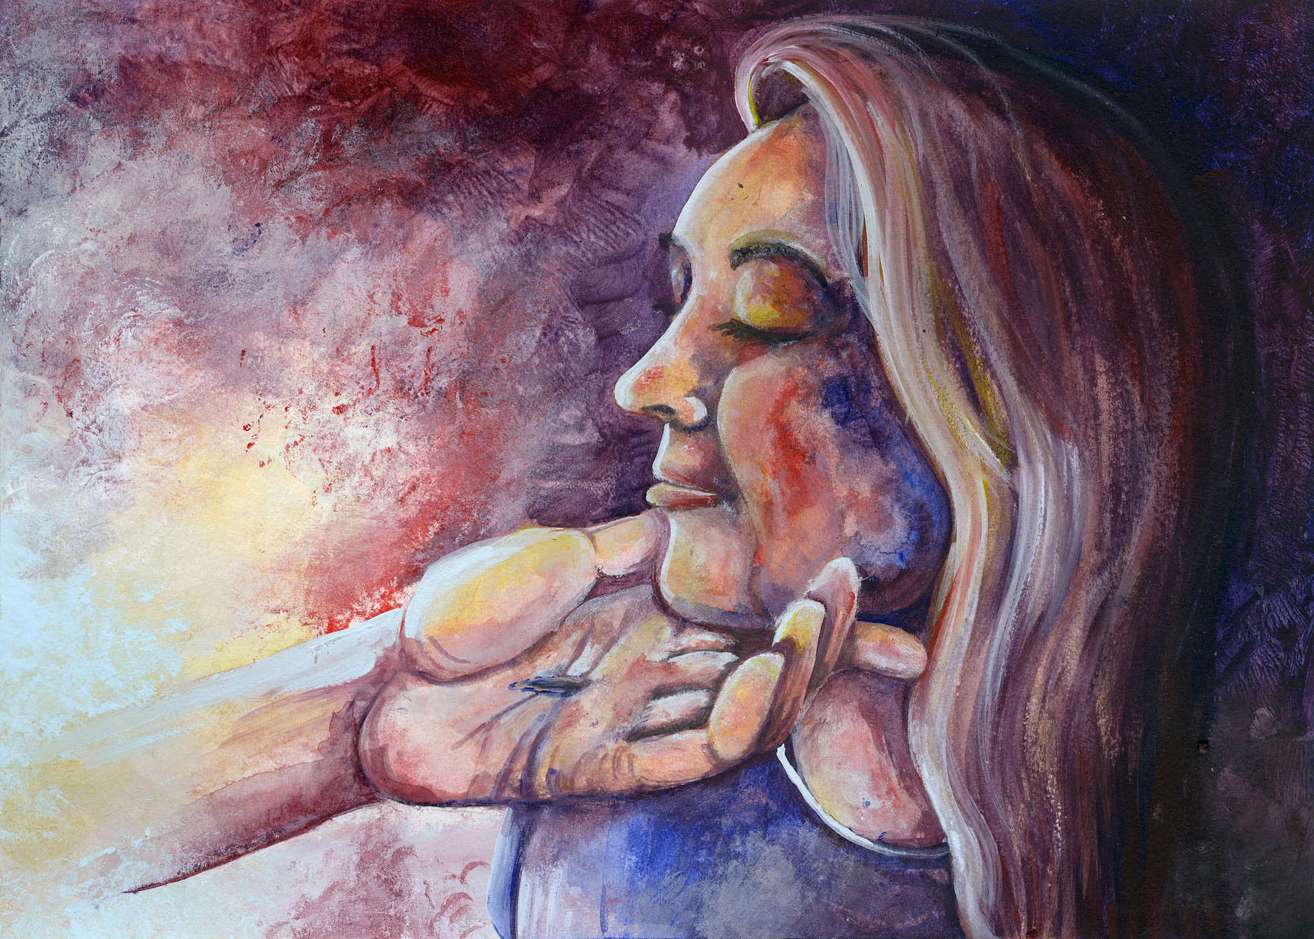 A painting of a hand reaching out to lift up a woman's face